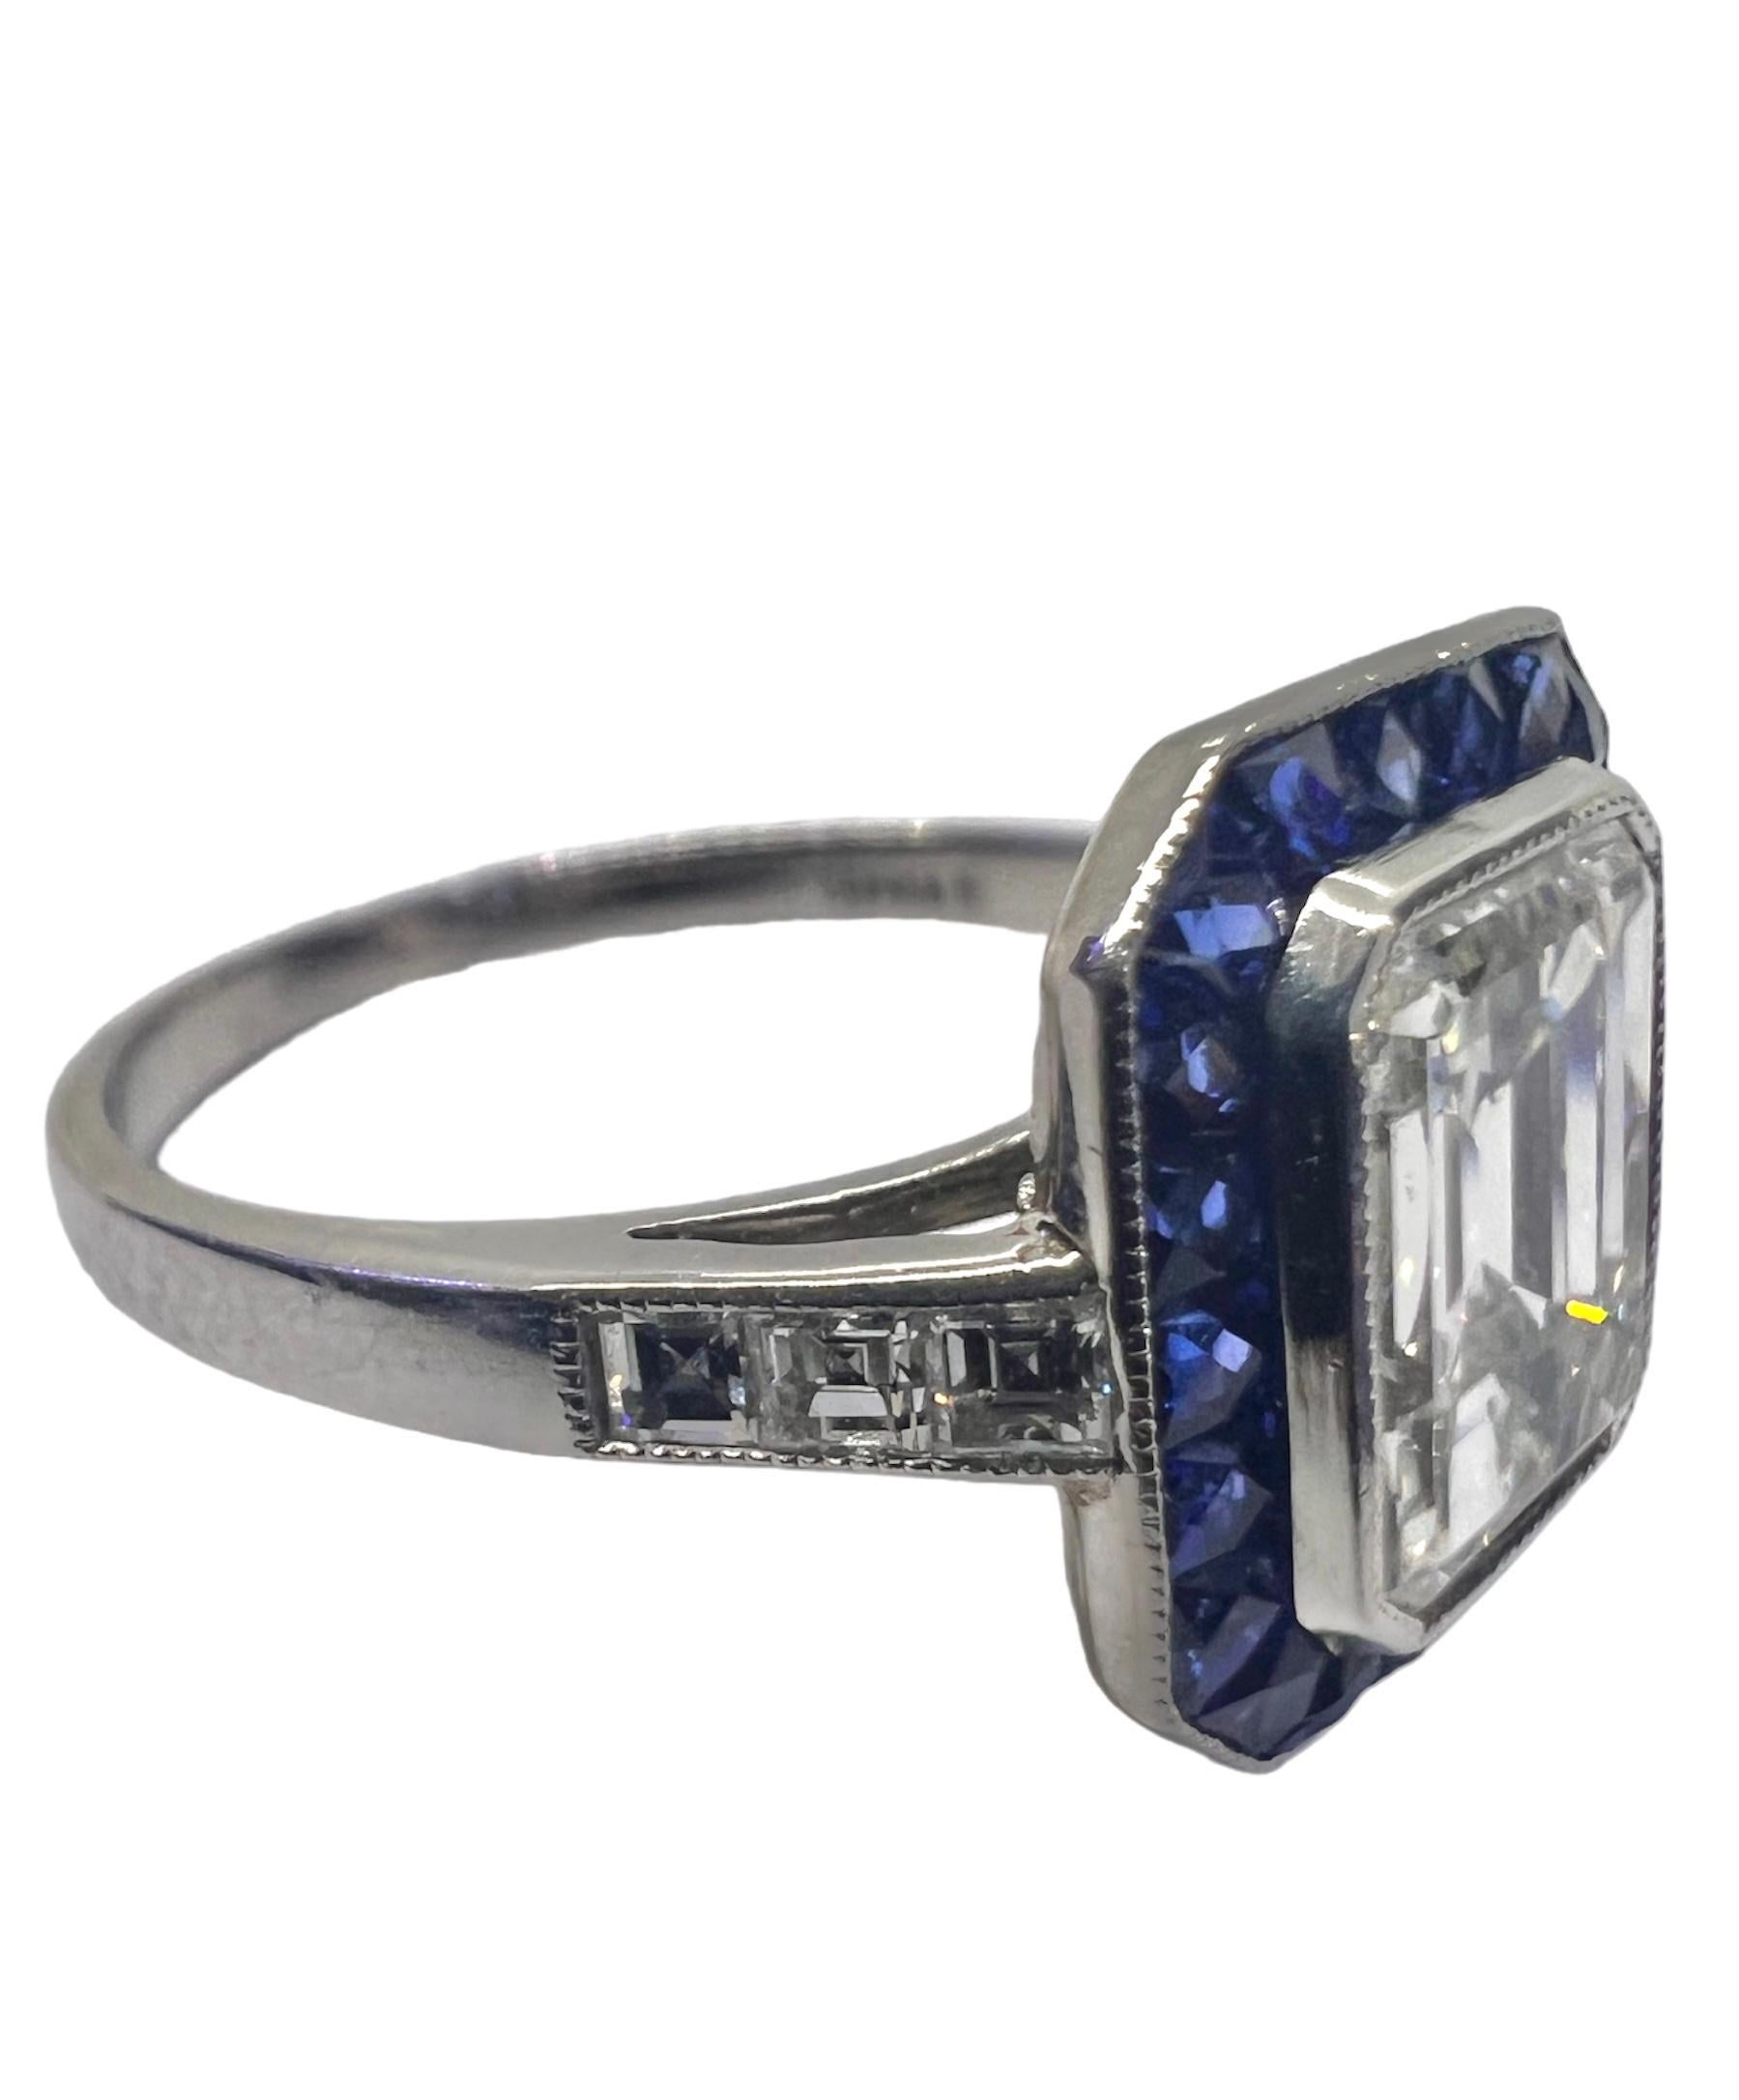 This Sophia D Art Deco style platinum ring contains a gorgeous 2.03 carat emerald cut diamond center which are surrounded by sapphires weighing 1.66 carats and diamonds weighing 0.21 carats.

Available for resizing.

Sophia D by Joseph Dardashti LTD